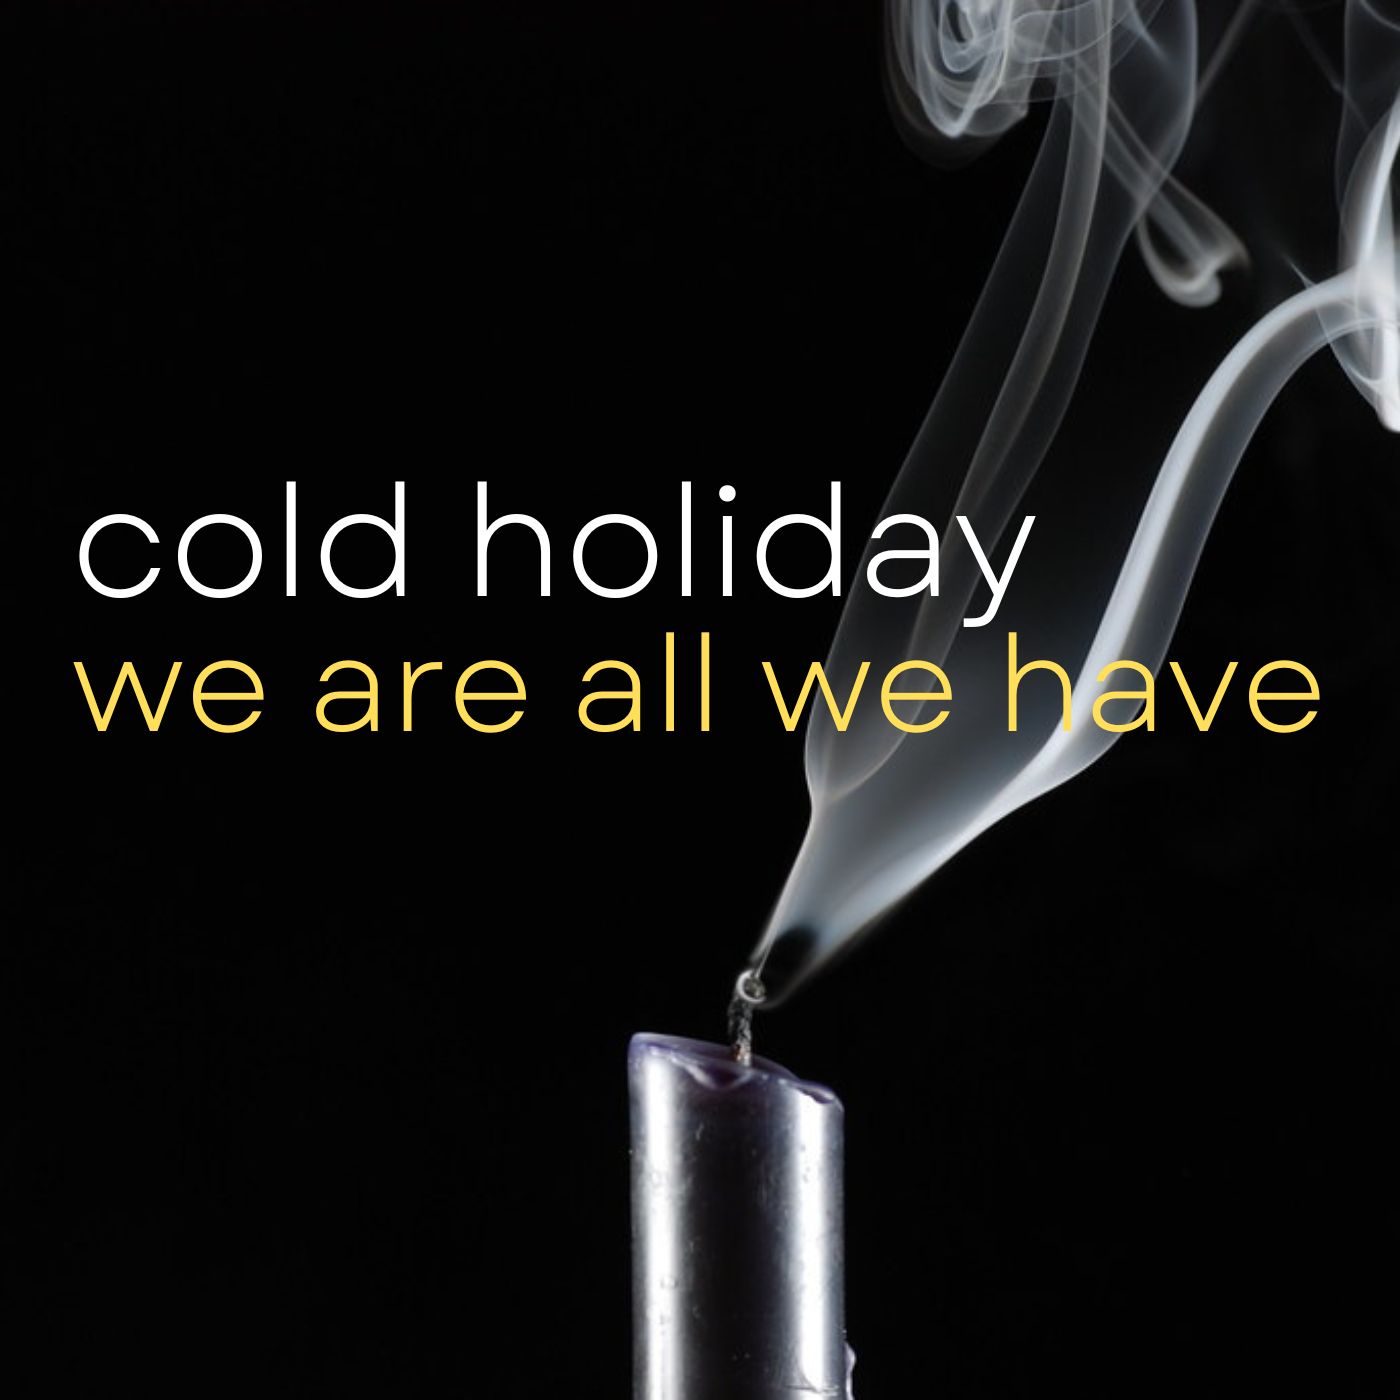 The cover for the album We Are All We Have by Cold Holiday features a candle that's just gone out in front of a black background. Cover photo by The Ewan via Flickr/Creative Commons https://www.flickr.com/photos/16168774@N00/5002629108